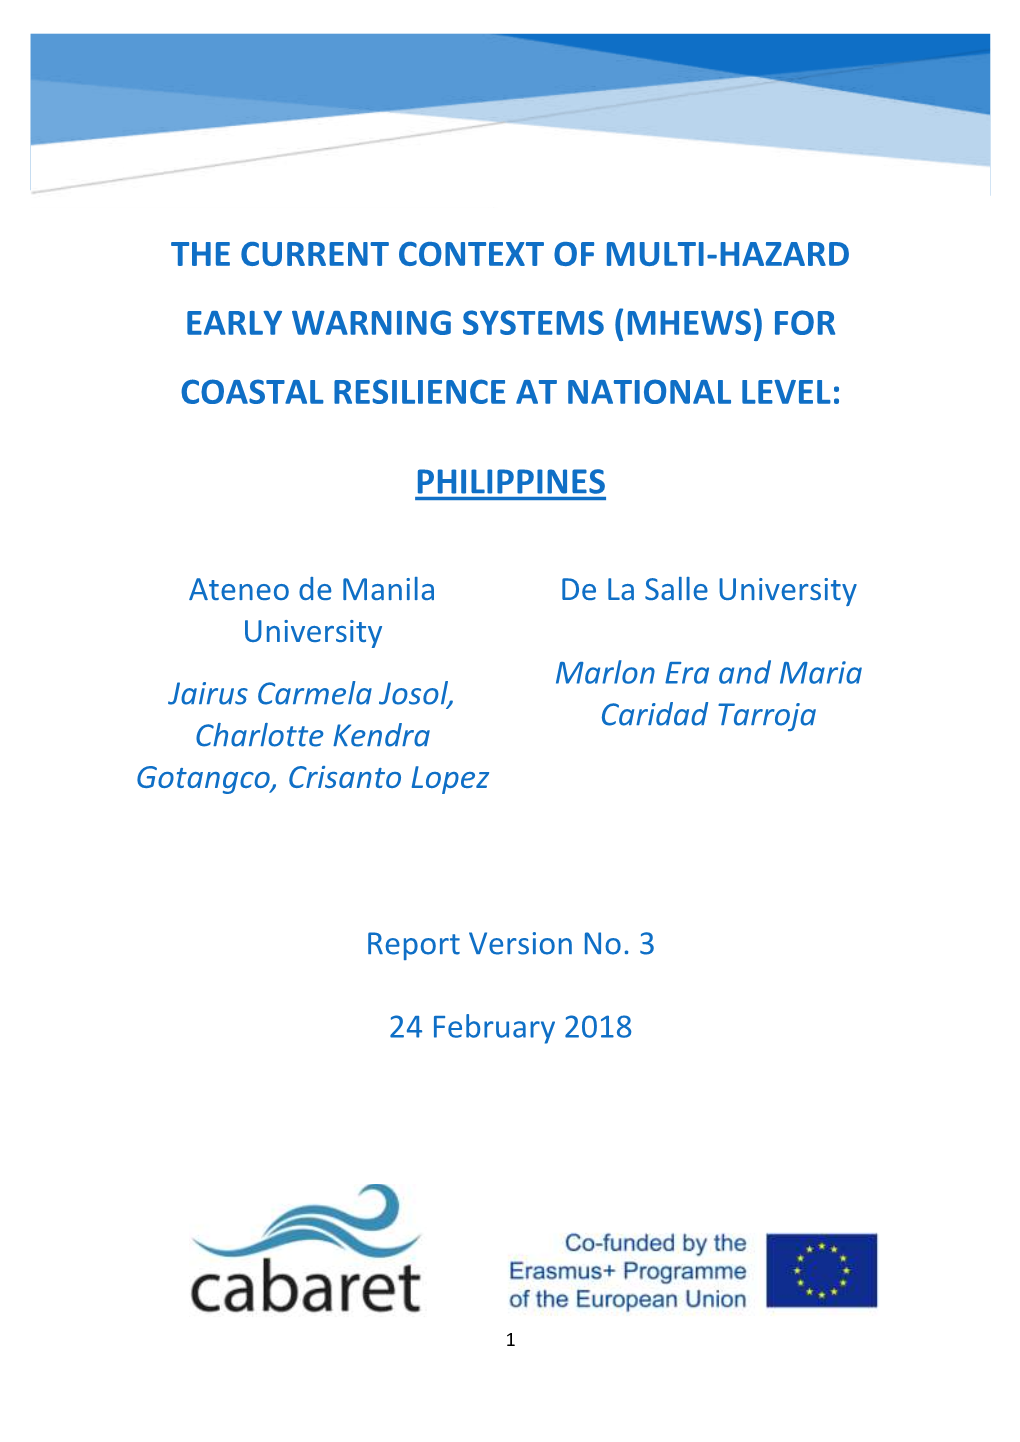 The Current Context of Multi-Hazard Early Warning Systems (Mhews) for Coastal Resilience at National Level